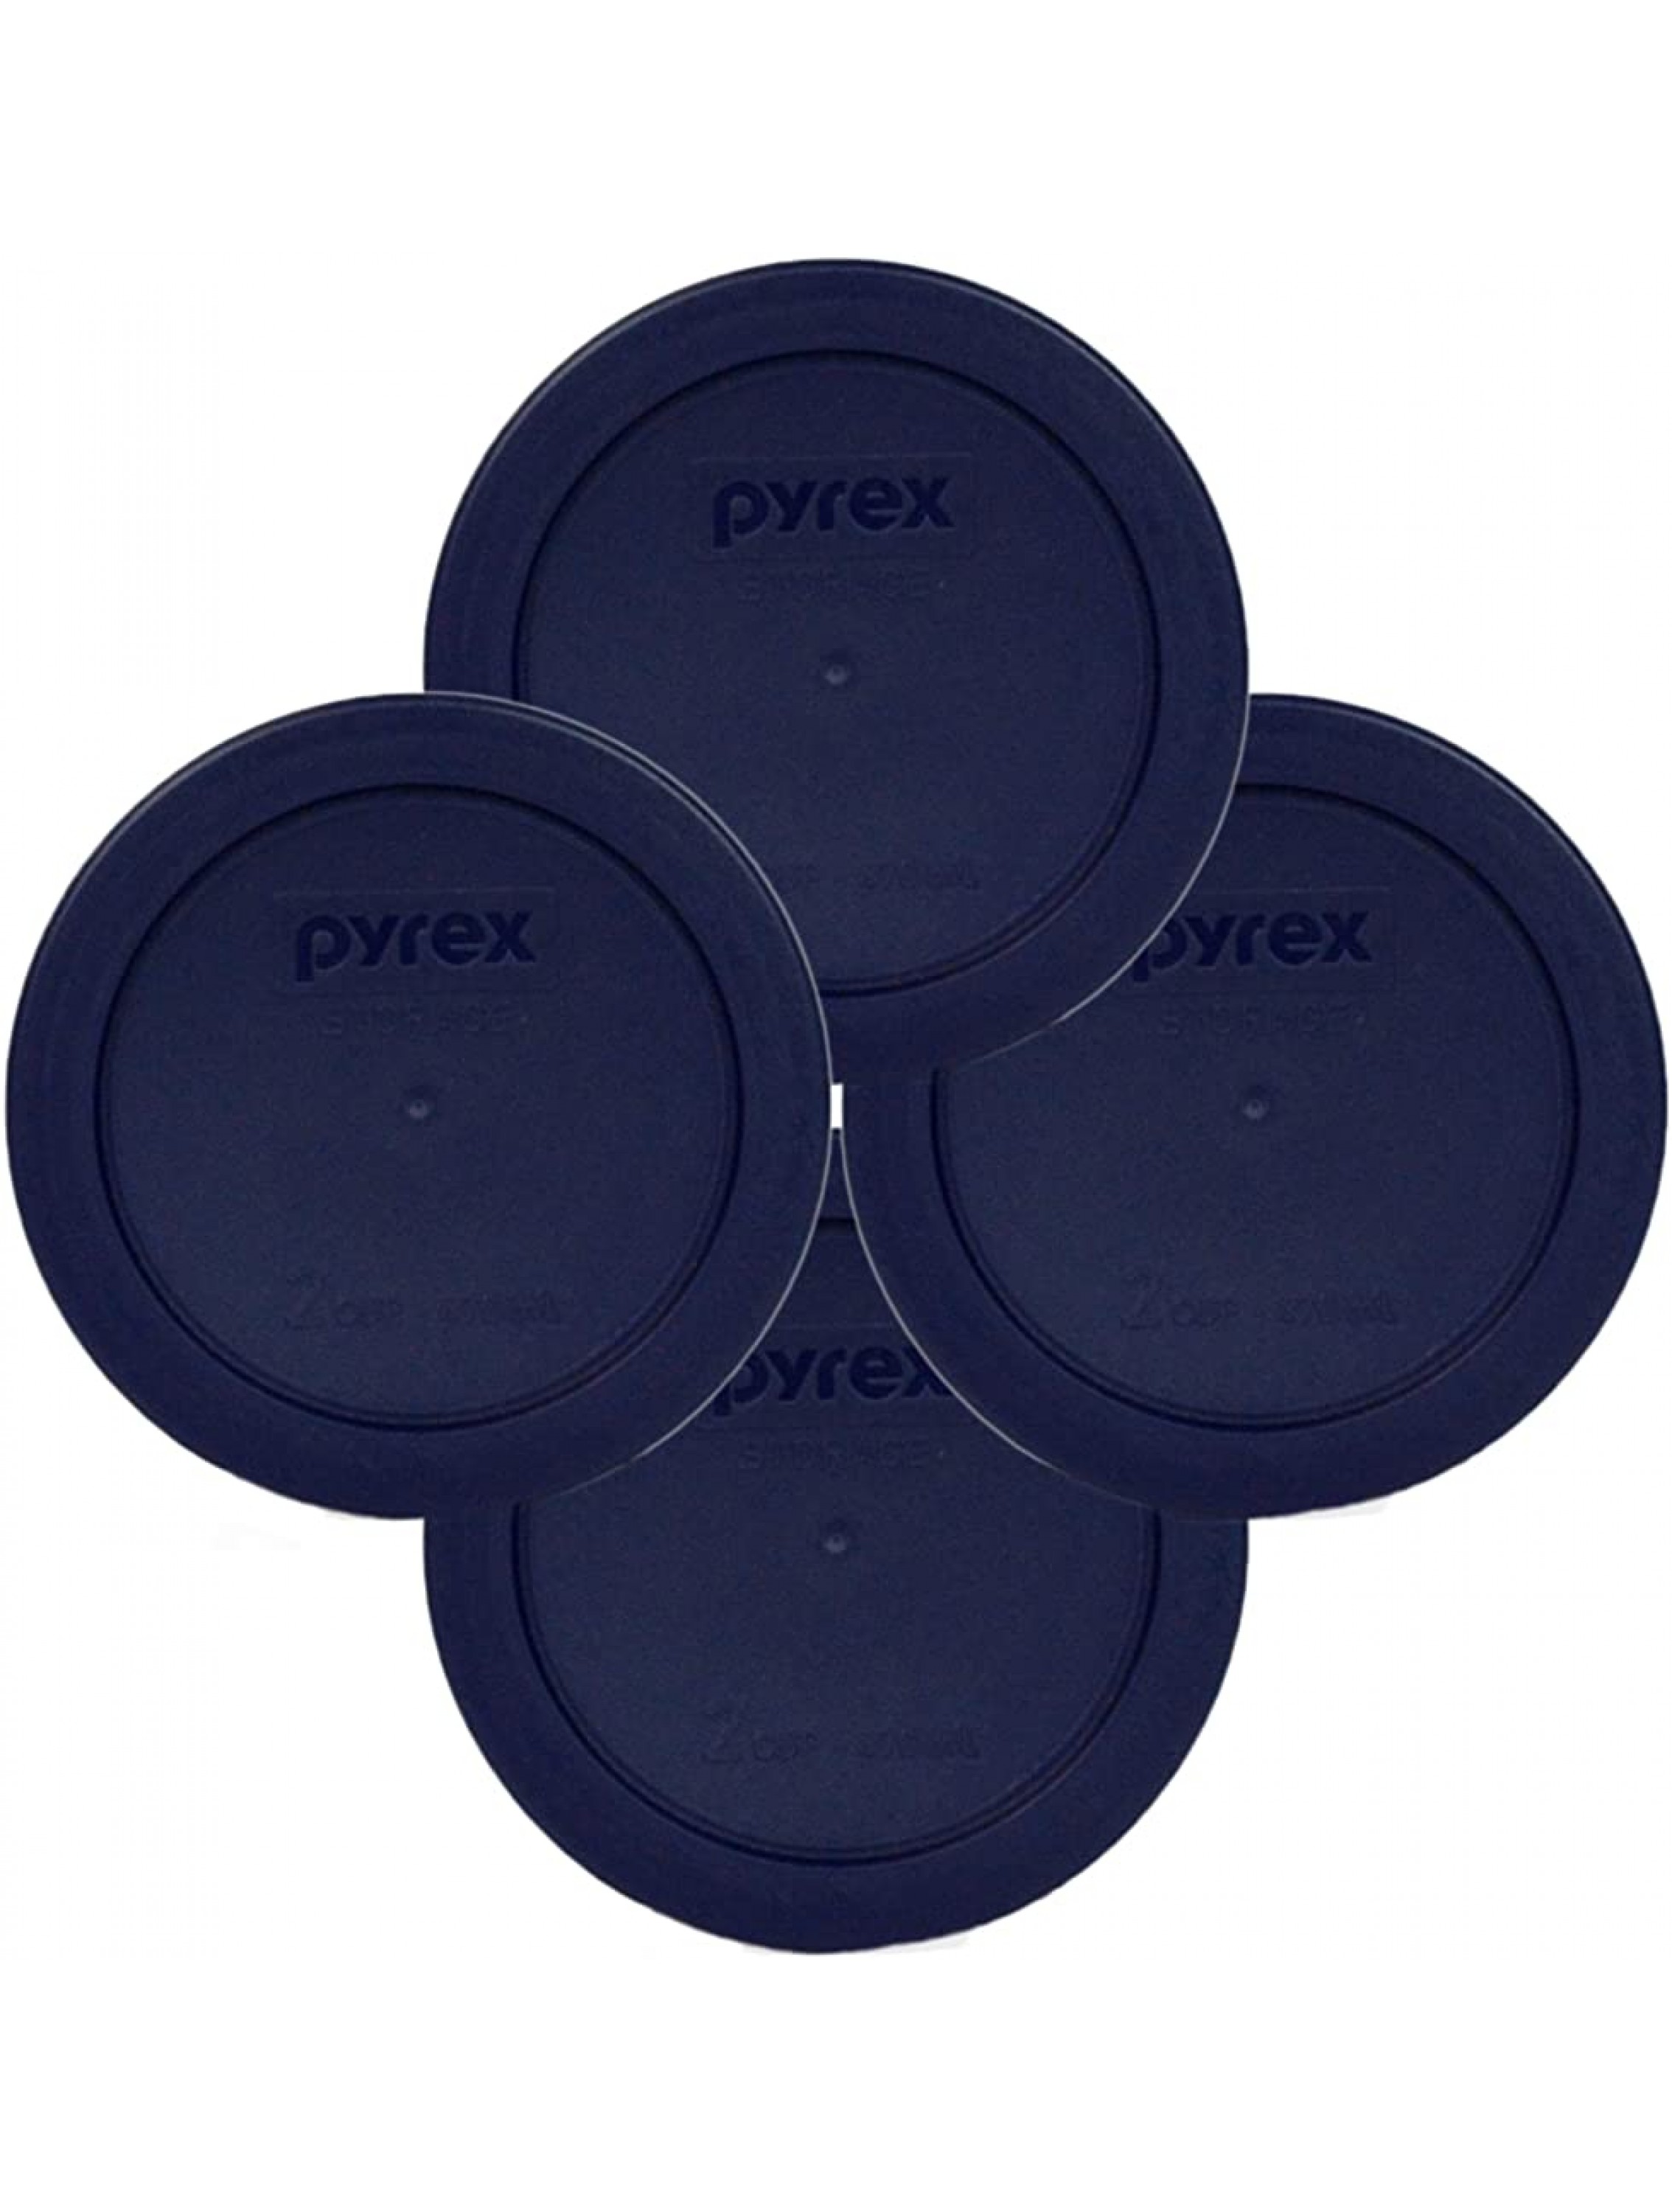 Pyrex Blue 2 Cup Round Storage Cover #7200-PC for Glass Bowls 4-Pack - BJYJ22Z7B